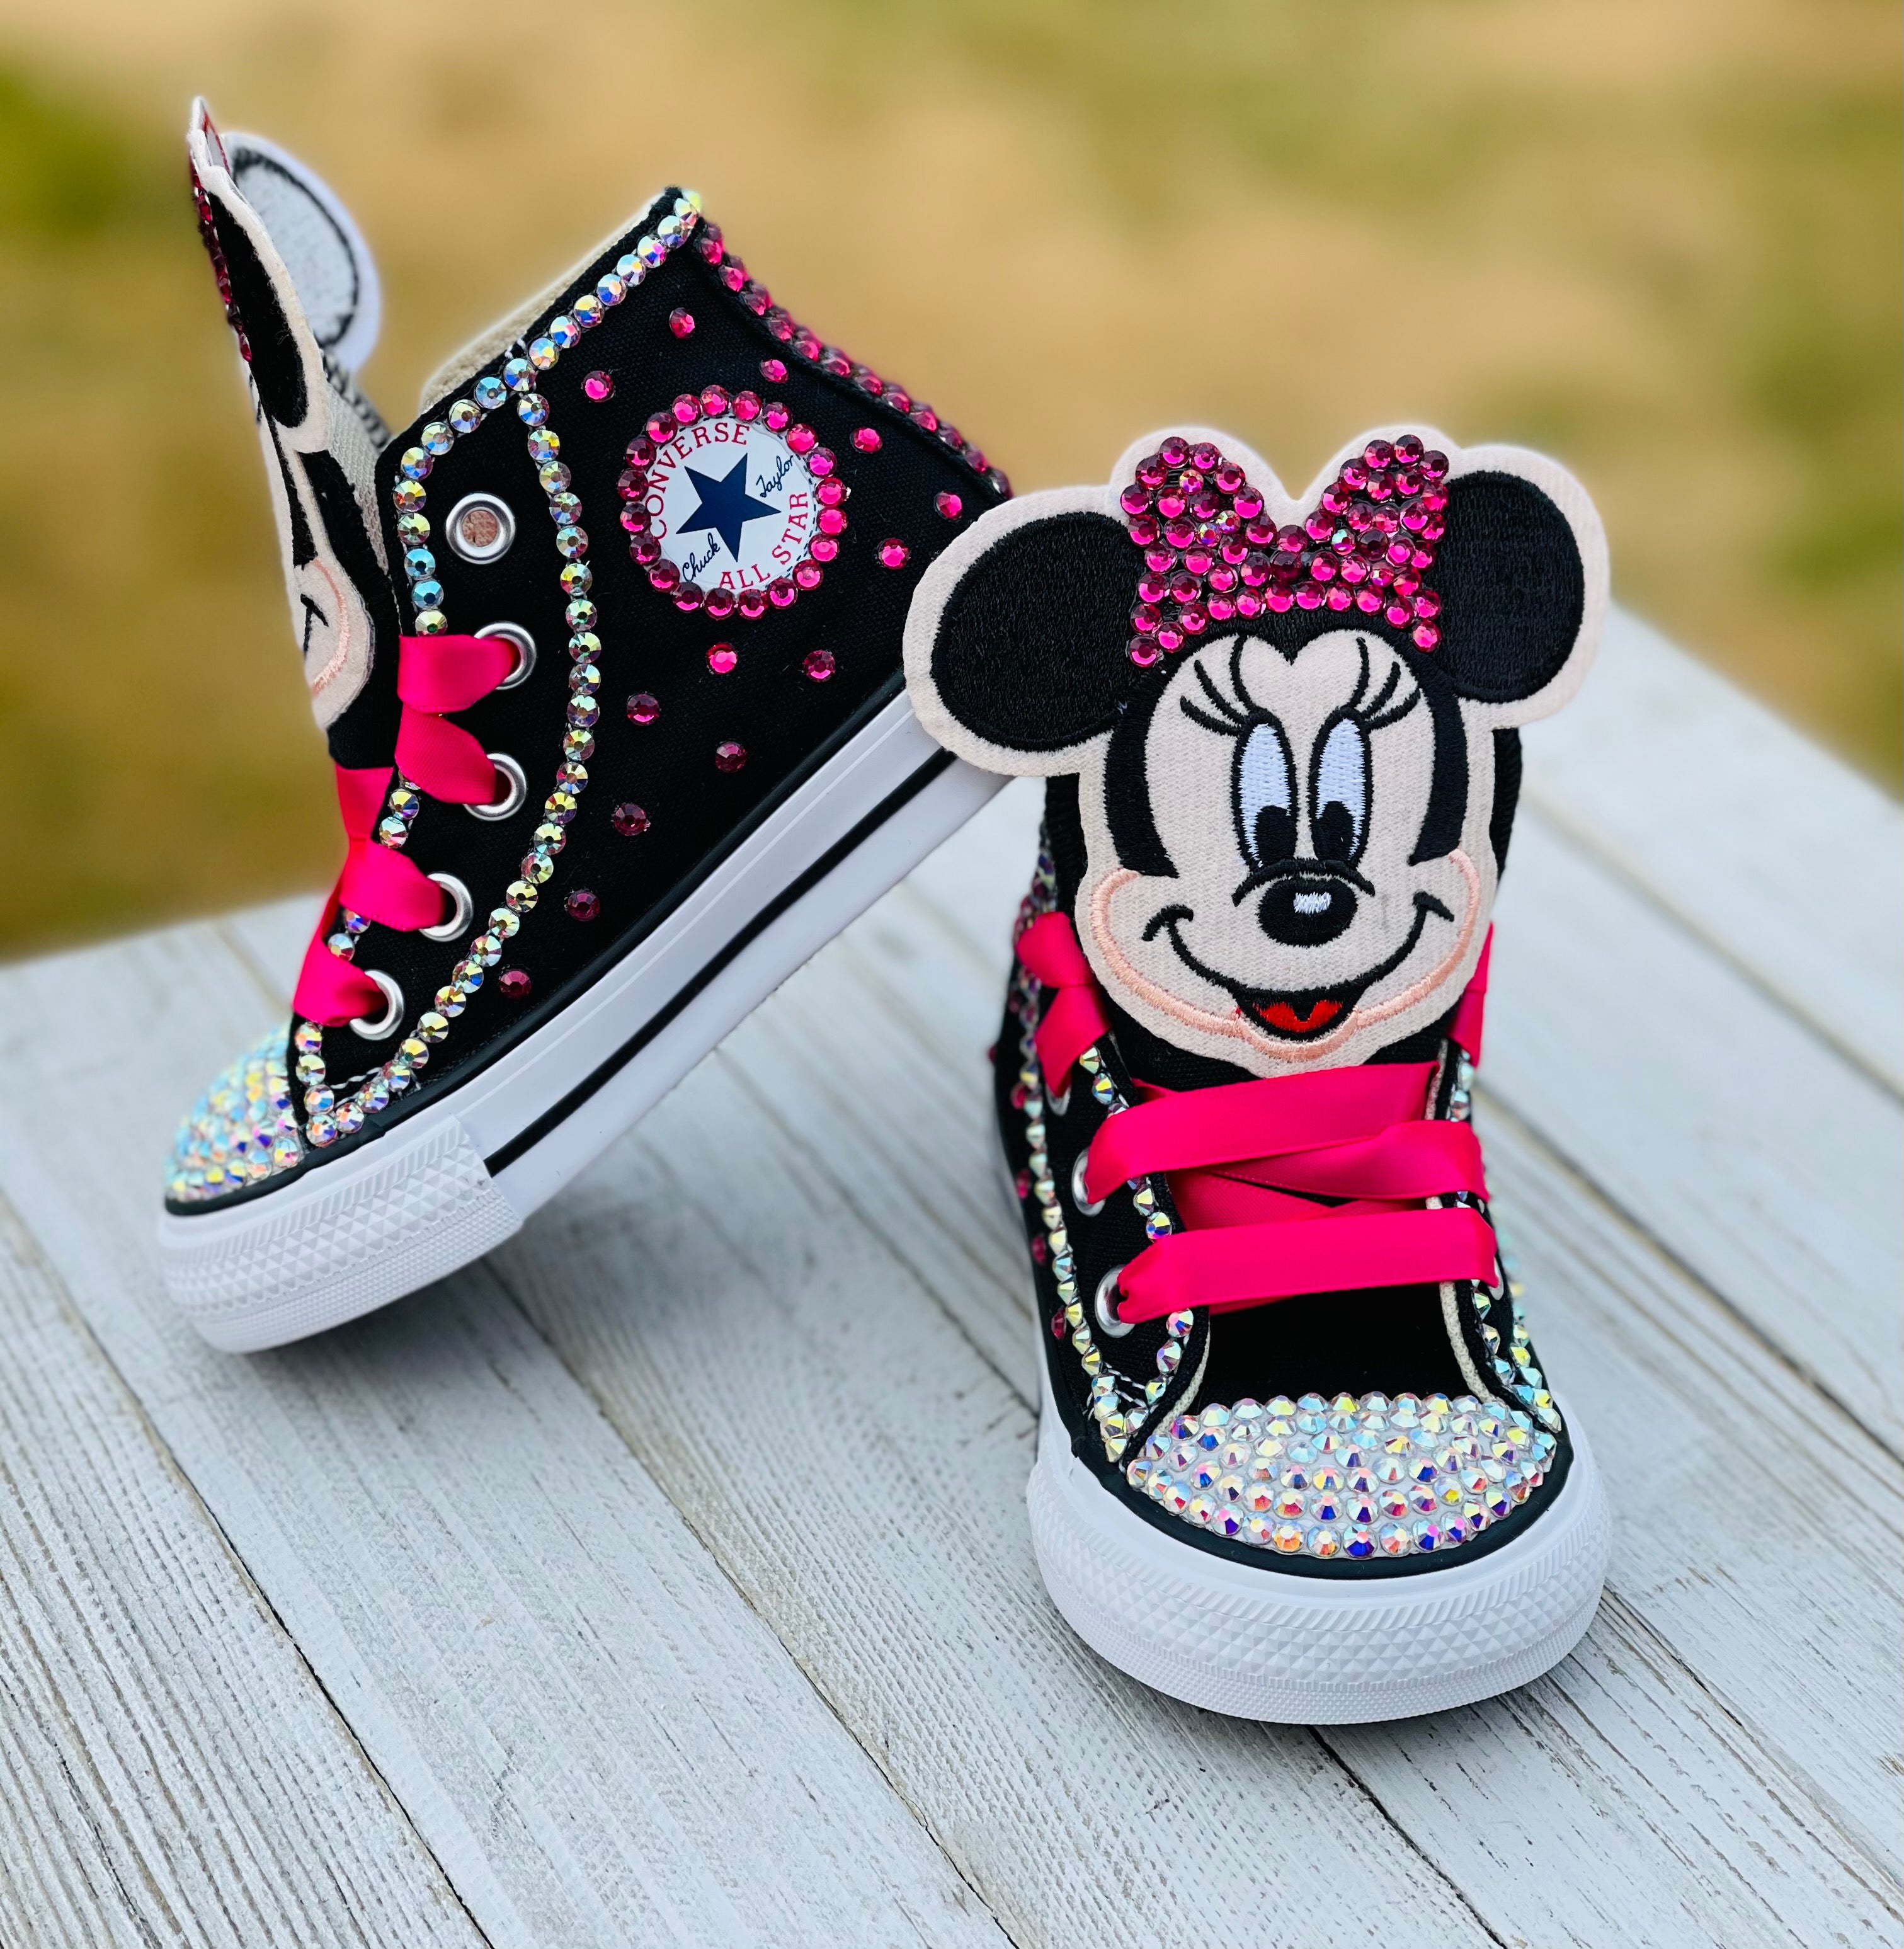 Girls Blinged Minnie Mouse Converse Sneakers | Little Ladybug Tutus